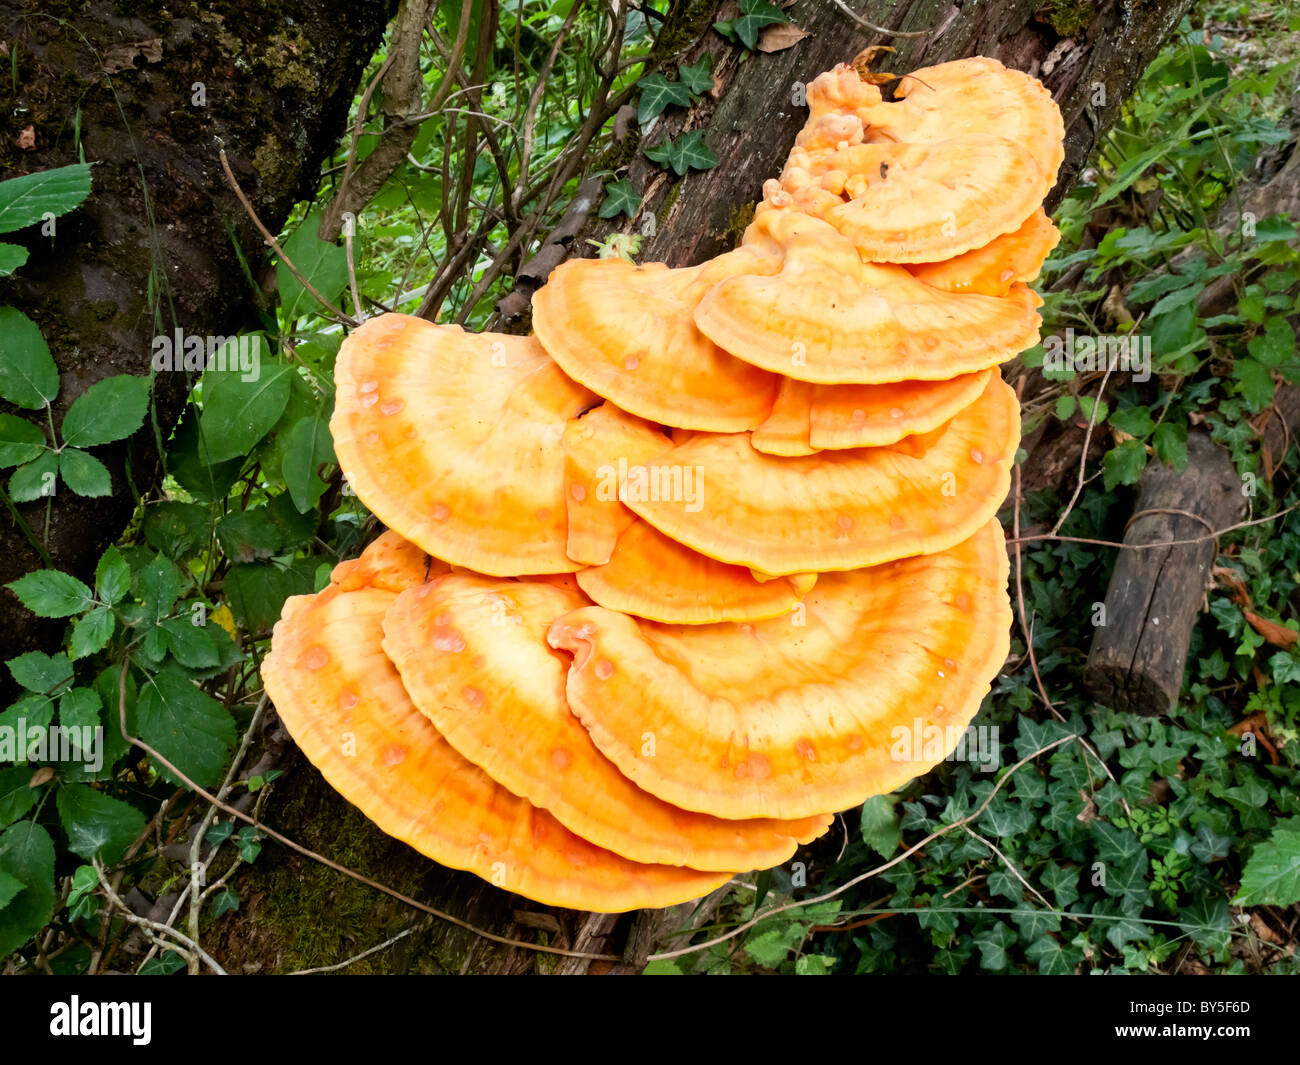 Bracket or shelf fungi of the phylum Basidiomycota showing characteristic fruiting bodies called conks growing on a tree trunk Stock Photo